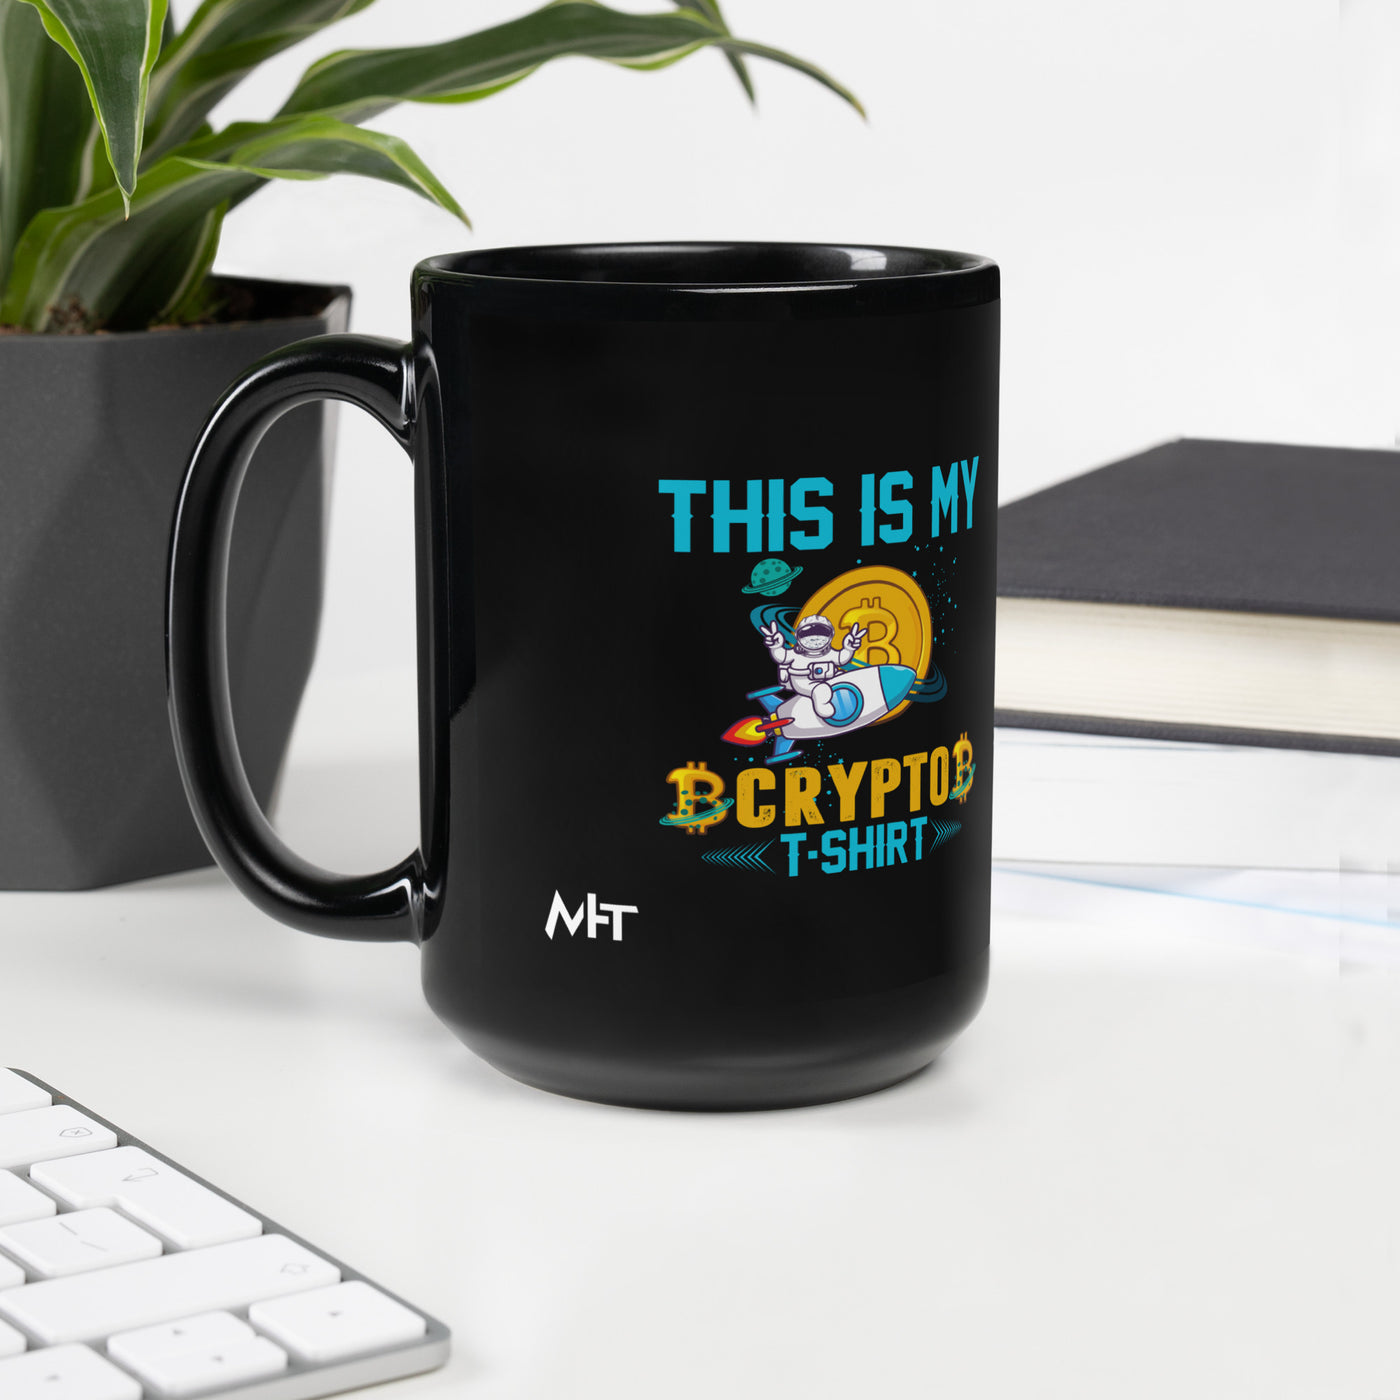 This is my Crypto T-shirt with Turtle Ninja and Missile - Black Glossy Mug